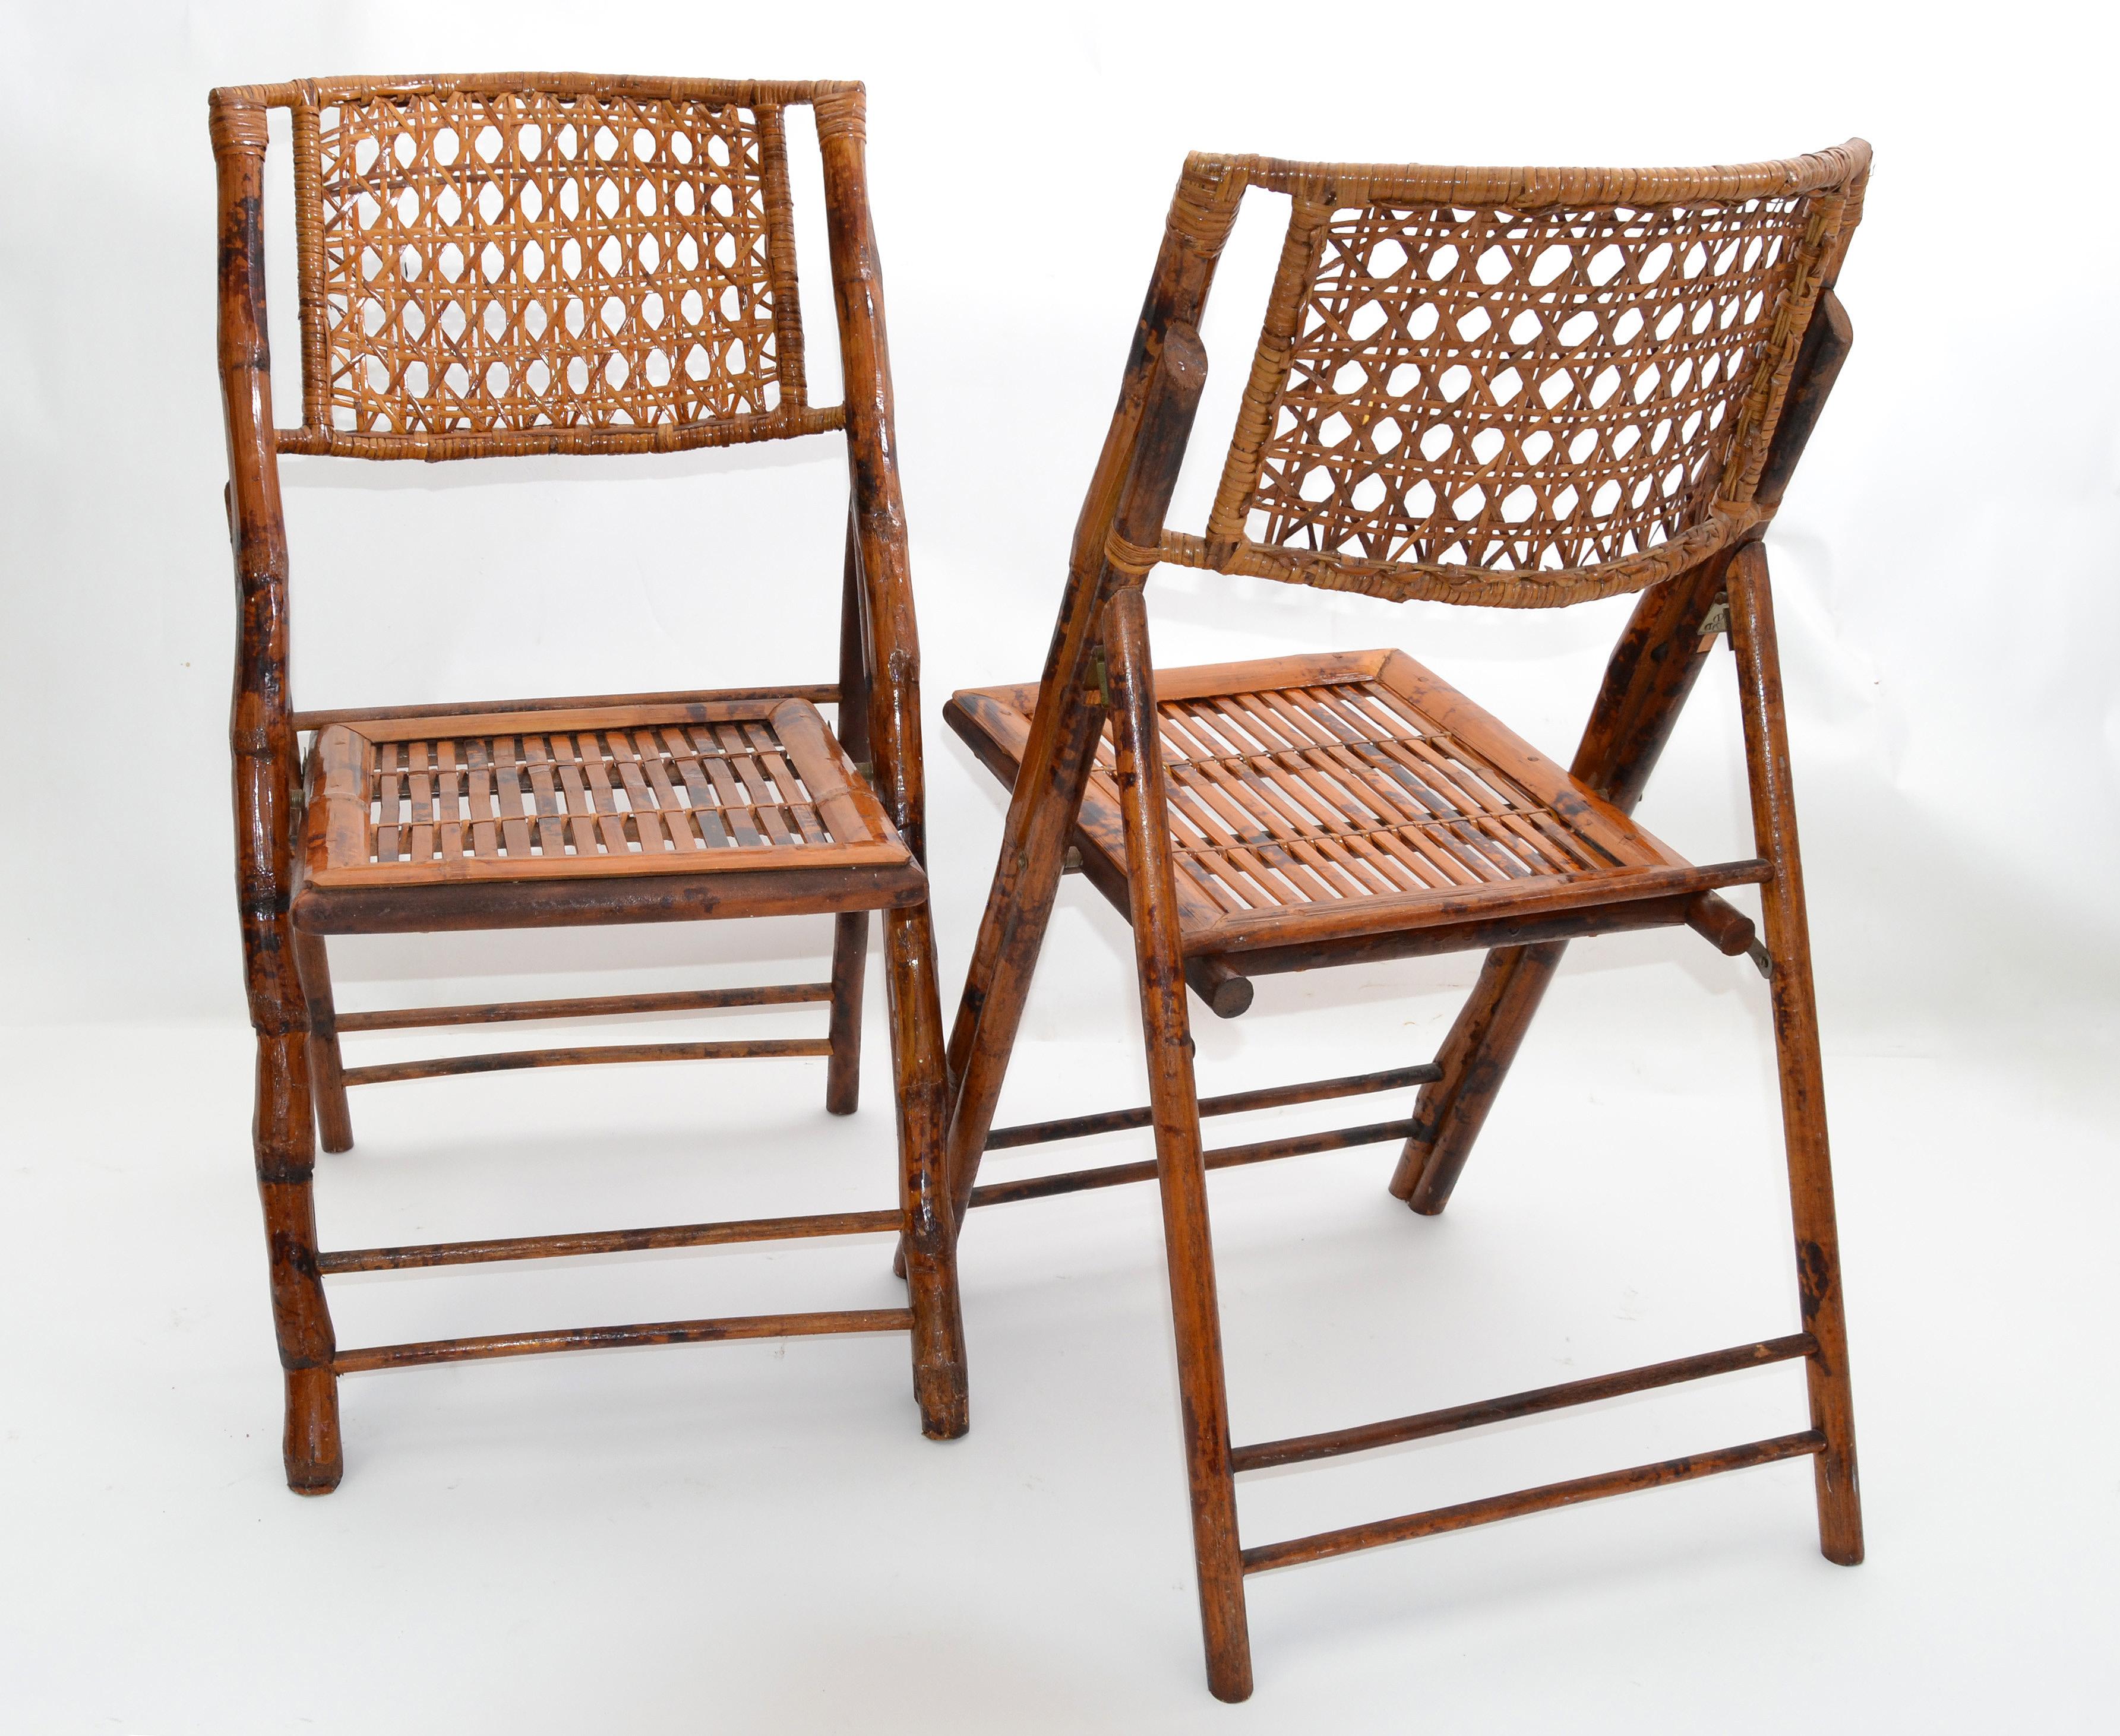 Hand-Crafted Boho Chic Mid-Century Modern Handcrafted Bamboo & Cane Folding Bistro Chairs, 4